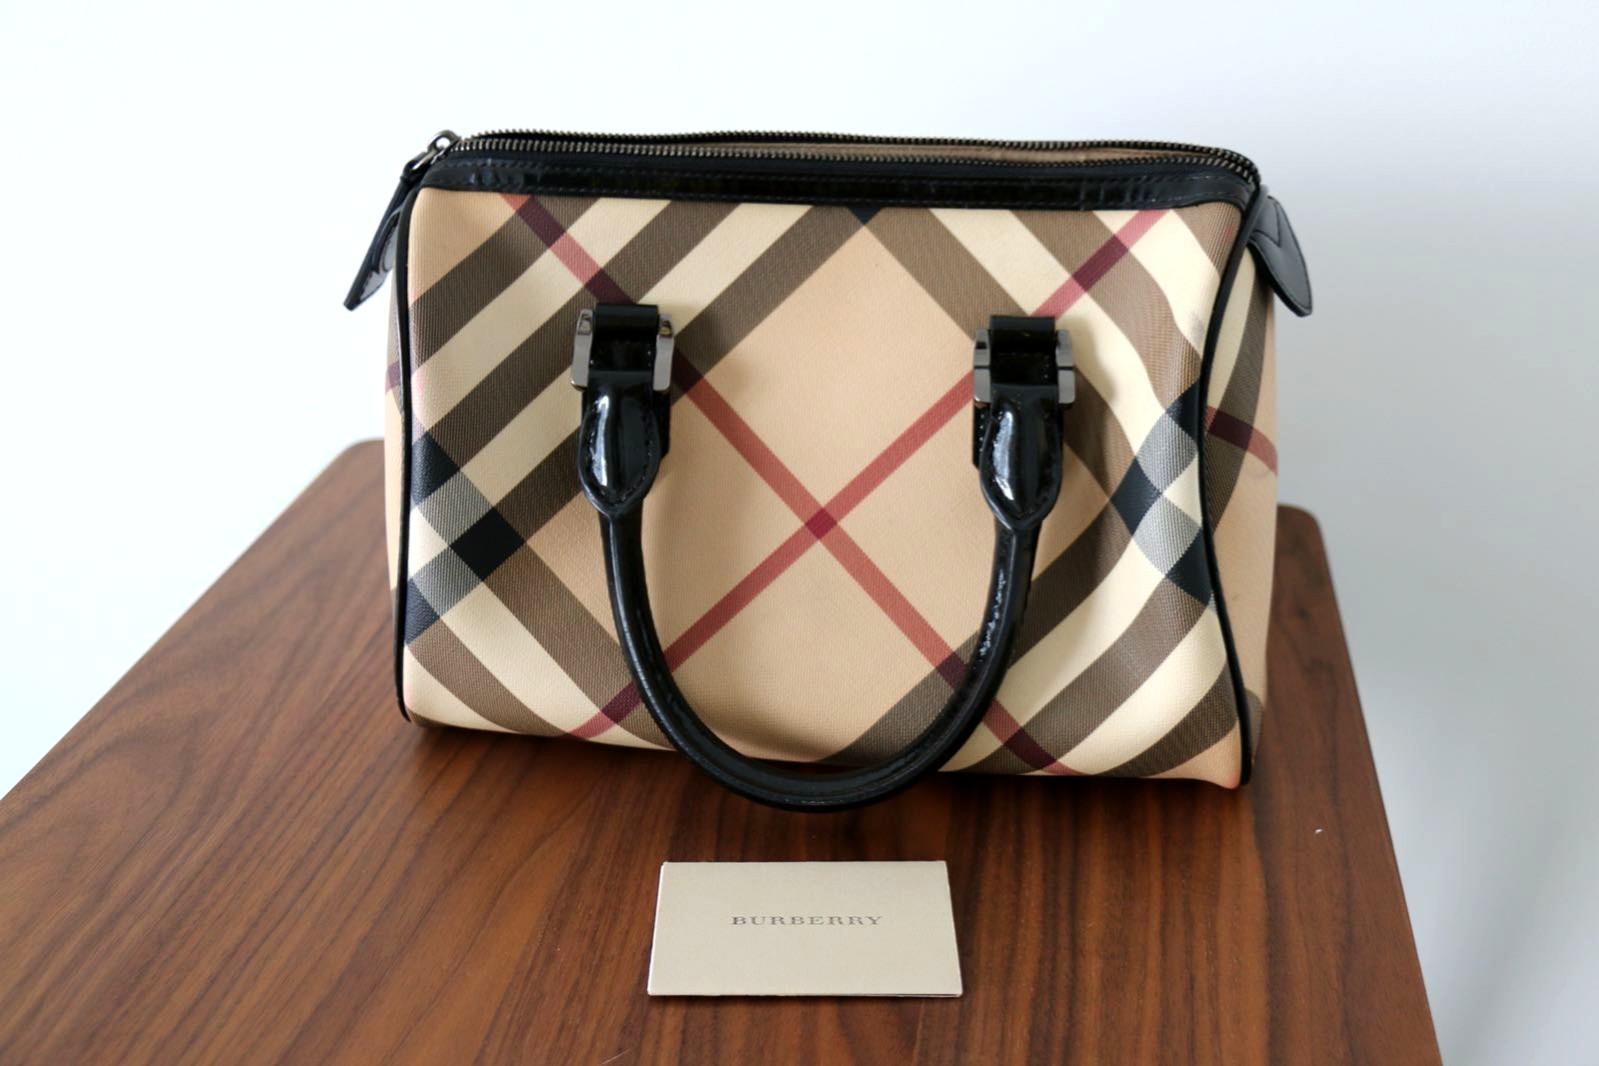 Vintage Burberry Nova Check Small Tote from Italy - Ruby Lane